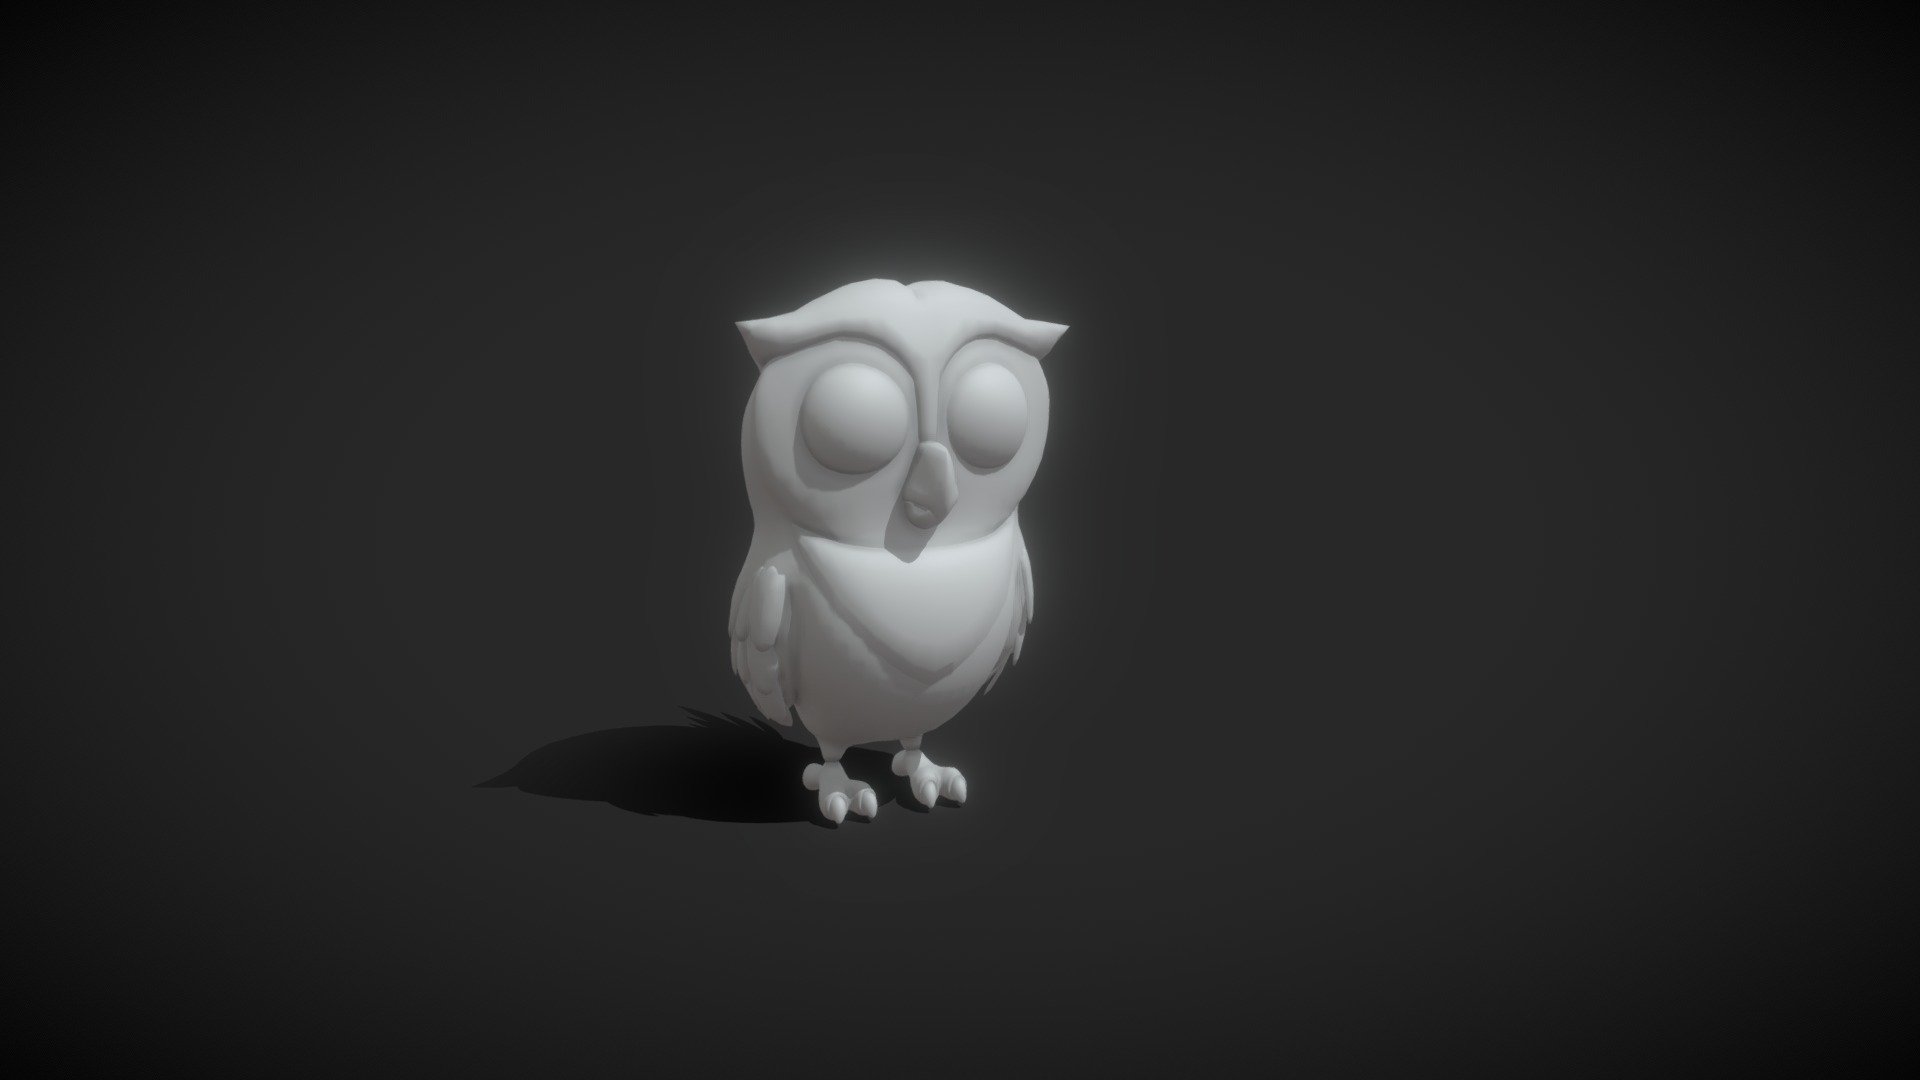 Cartoon Owl Rigged Base Mesh 3D Model is completely ready to be used as a starting point to develop your characters.  

Good topology ready for animation.  

Technical details:  




File formats included in the package are: FBX, GLB, BLEND, gLTF (generated), USDZ (generated)

Native software file format: BLEND

Render engine: Eevee

Polygons: 10,551

Vertices: 10,679

The model is rigged.
 - Cartoon Owl Rigged Base Mesh 3D Model - Buy Royalty Free 3D model by 3DDisco 3d model